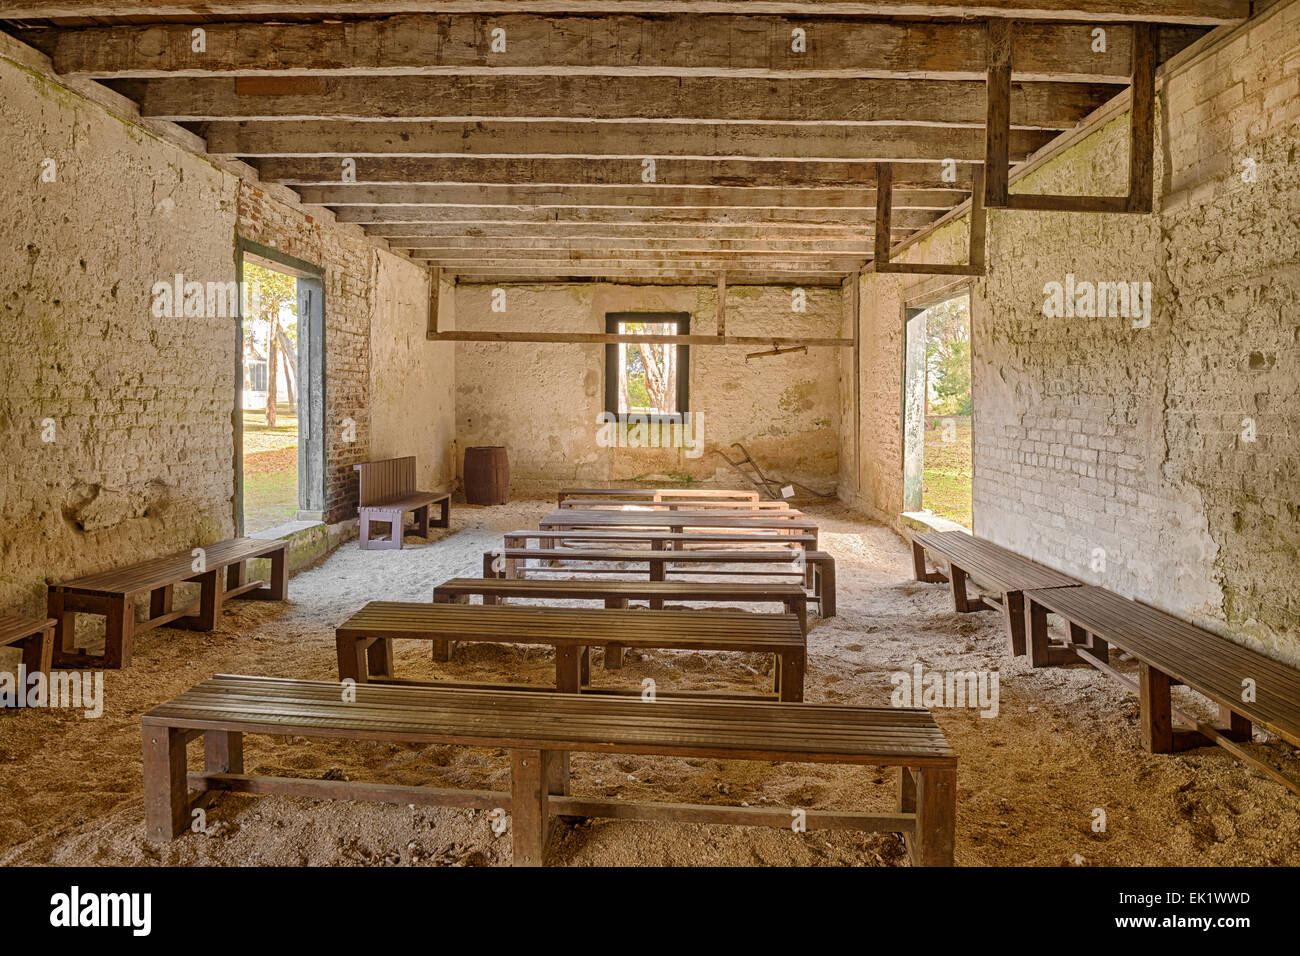 Interior of the Kingsley Plantation Barn built from a mix of sand, lime, and water Stock Photo